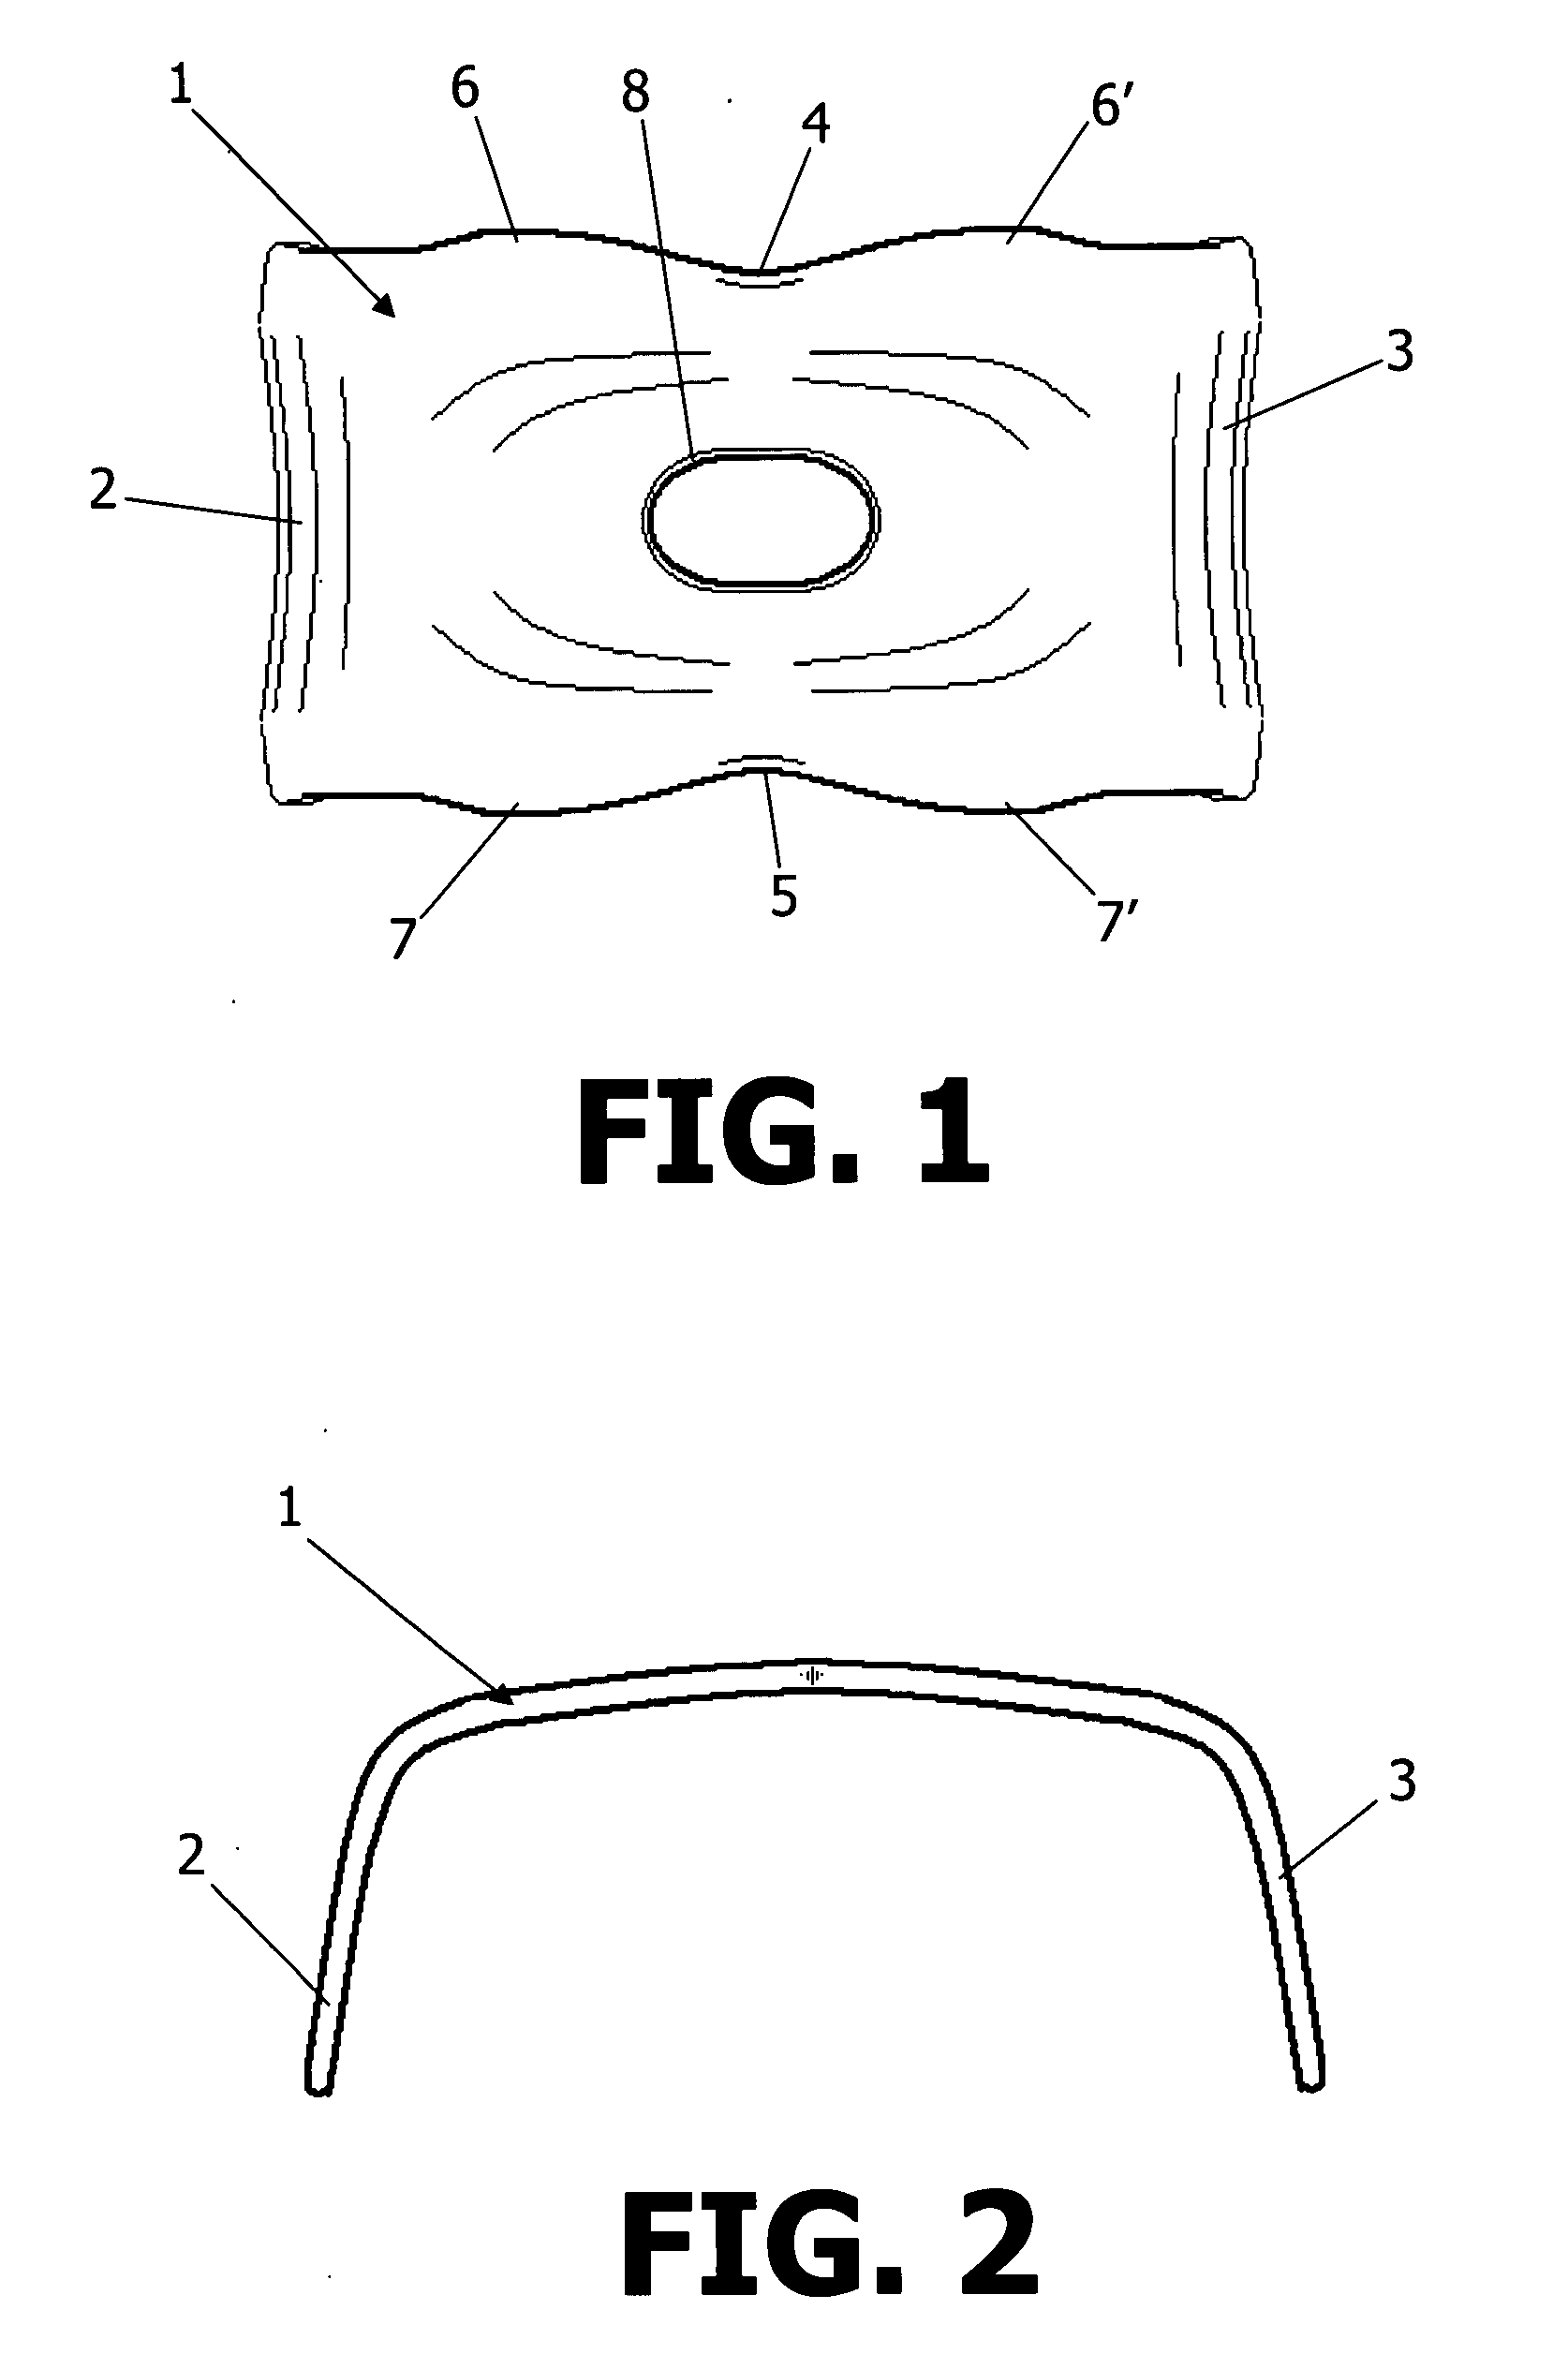 Oral device to facilitate the artificial pulmonary ventilation to an unconscious edentulous patients